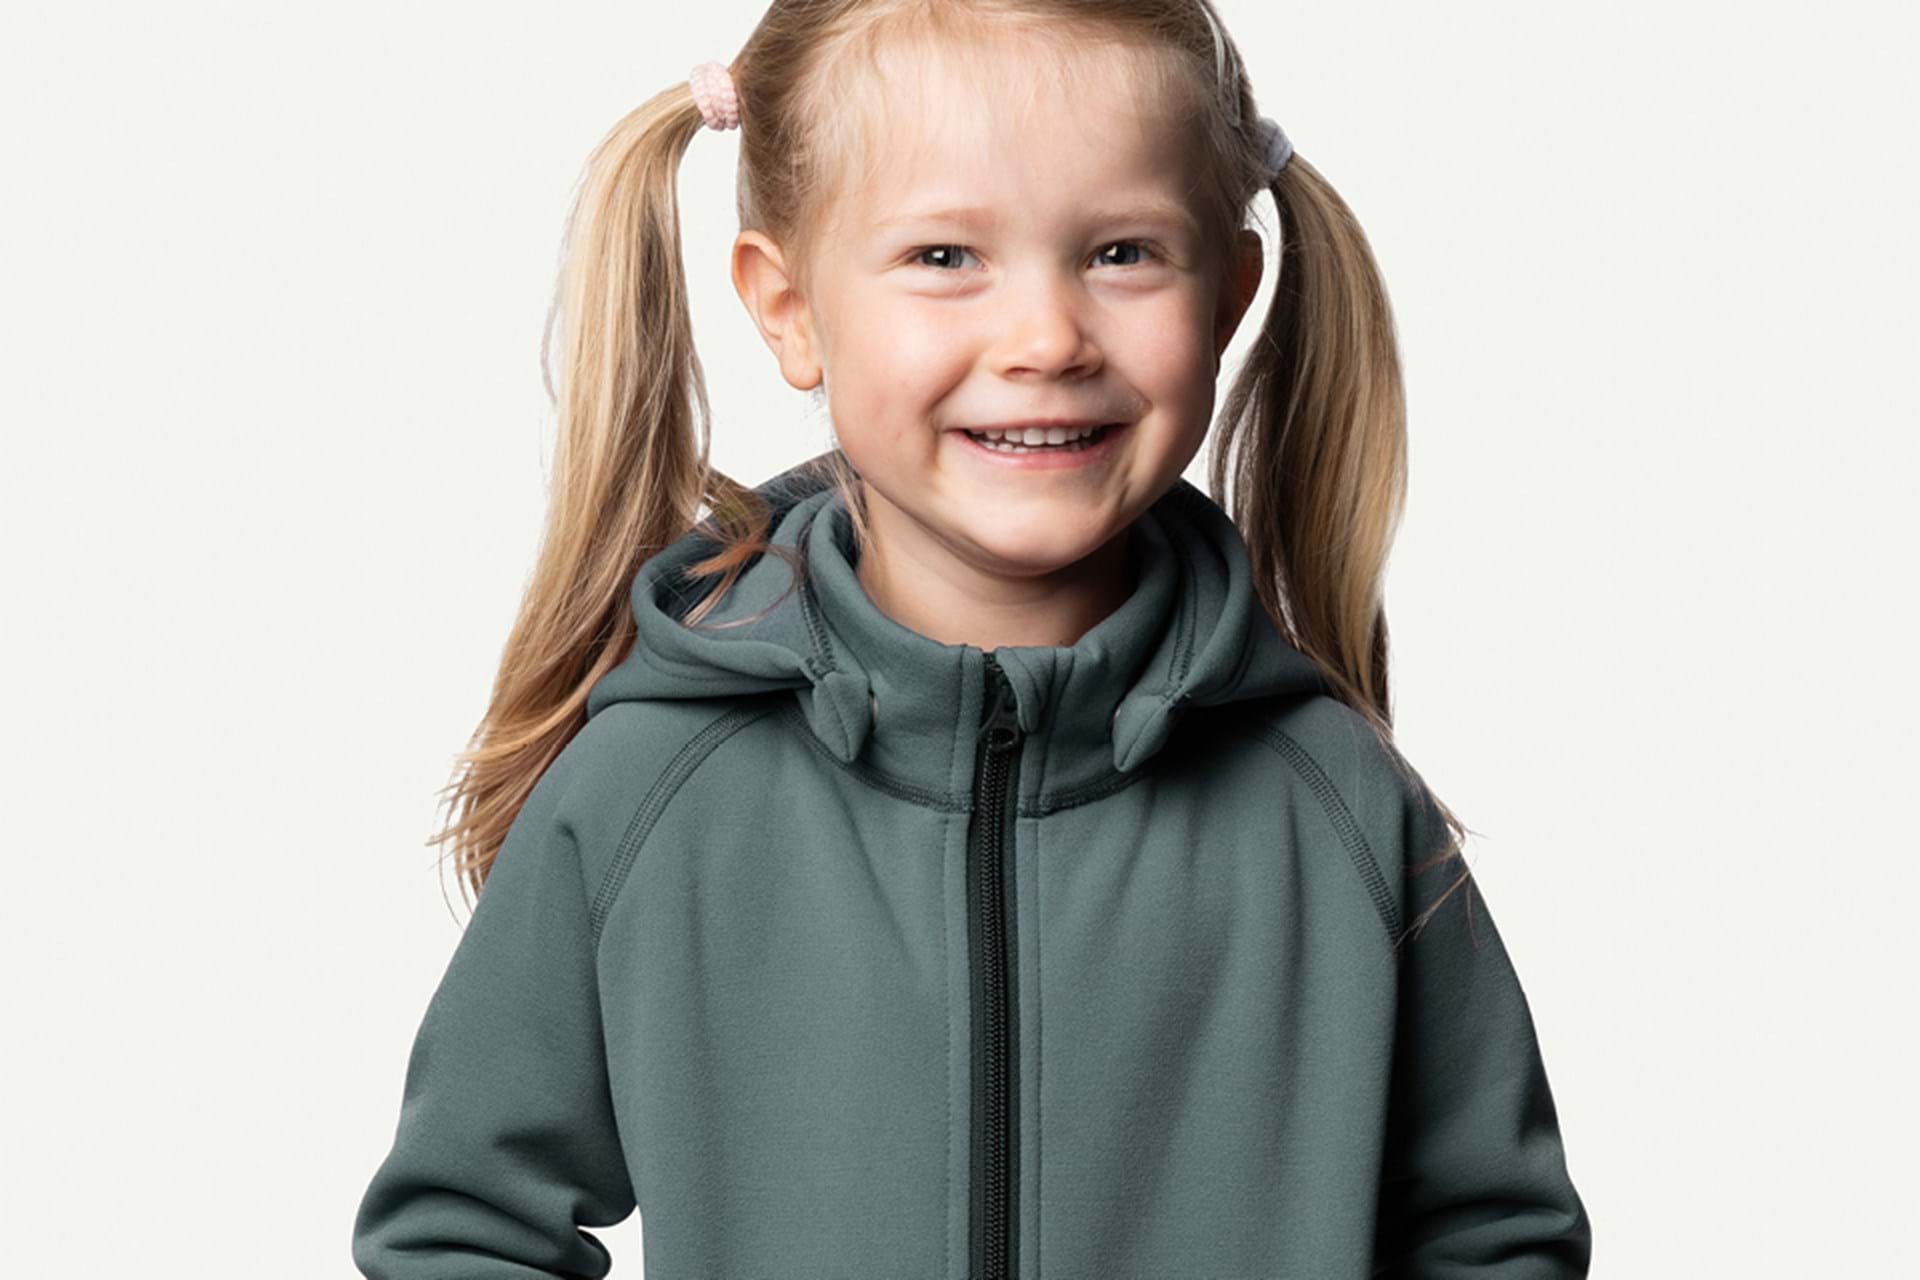 Buy sustainable outdoor clothes for kids. Fleece Jackets, Long johns and pants to tag along on our adventures. Find online at HoudiniSportswear.com.